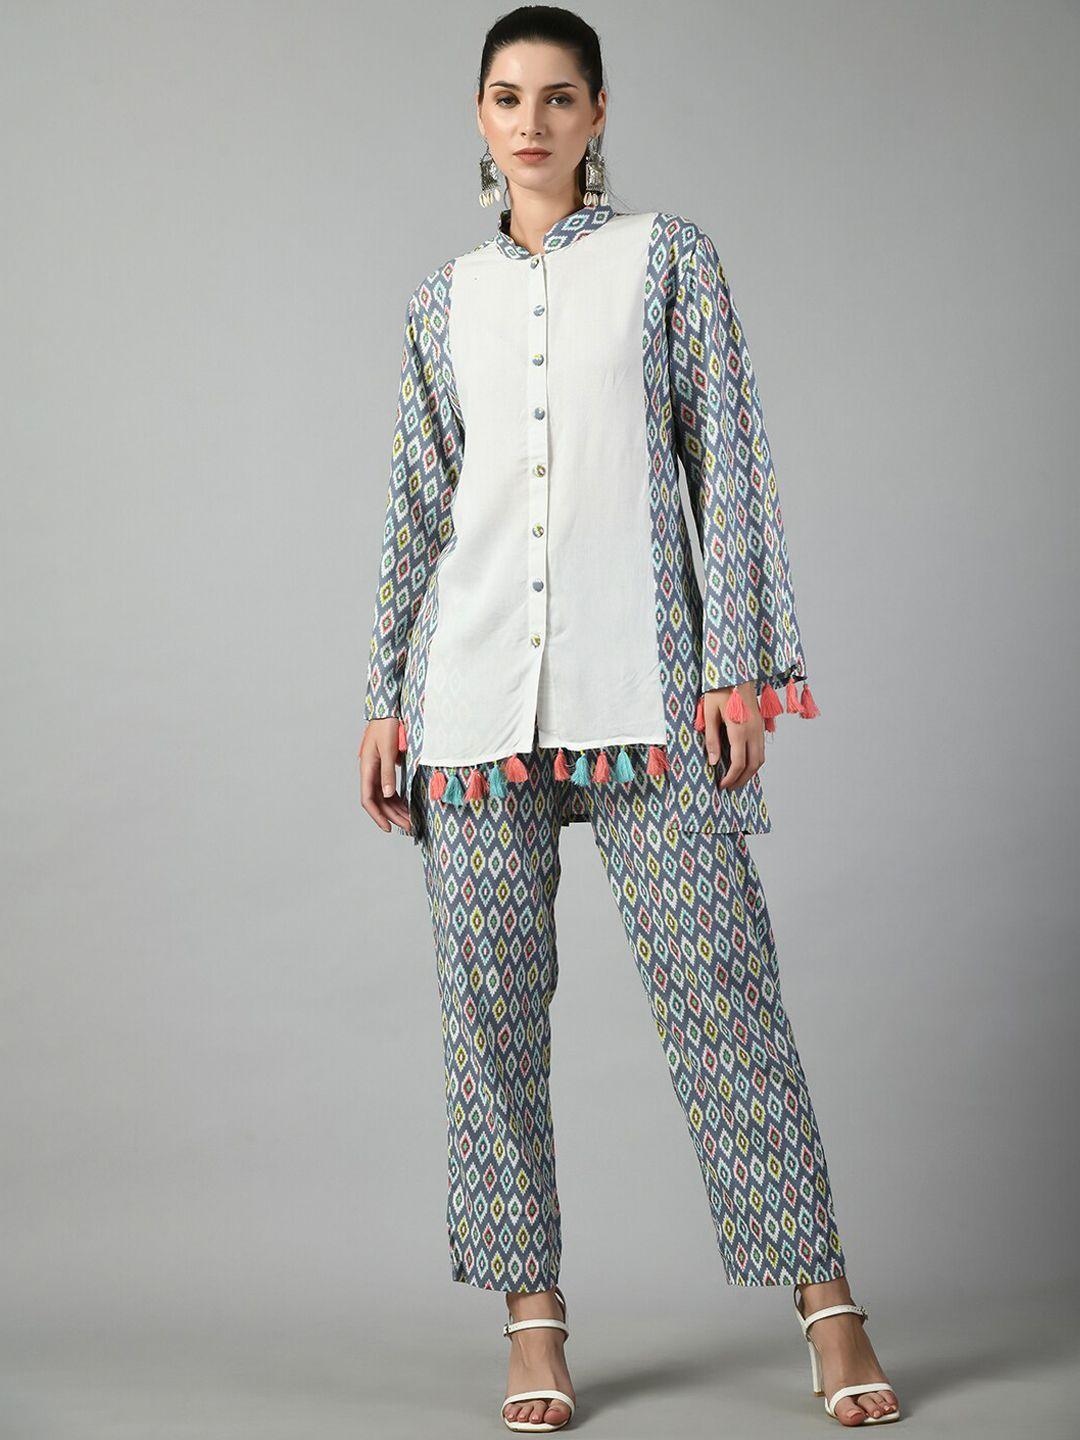 doisa printed top with trousers co-ords